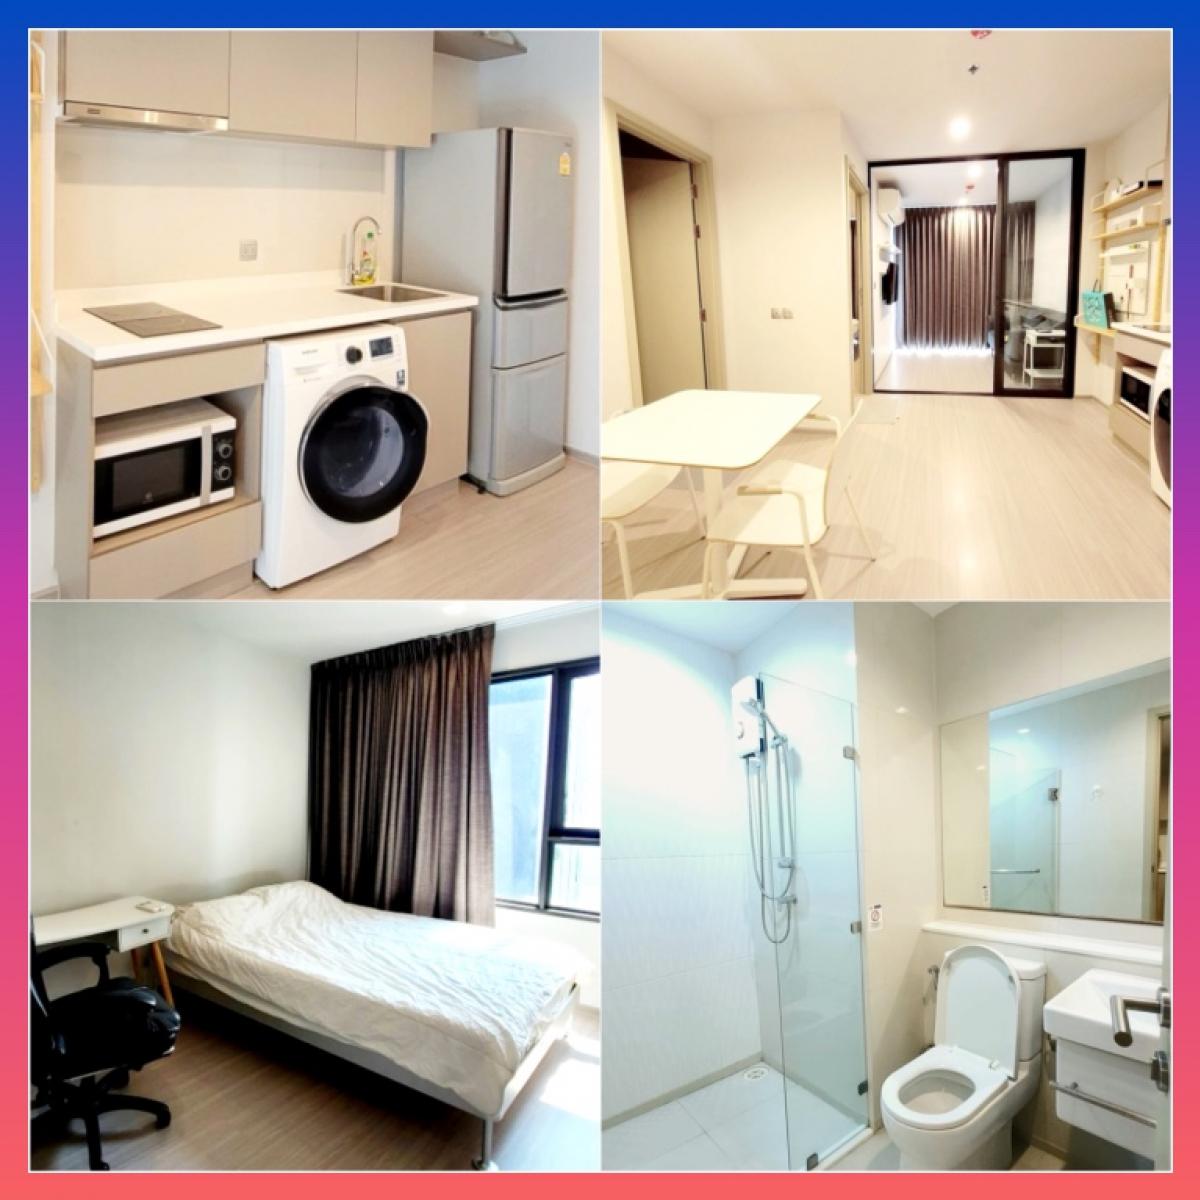 For RentCondoLadprao, Central Ladprao : Life Ladprao Life Ladprao Condo for rent near BTS Ladprao Intersection, Central Lotus, Phahon Yothin, Hor Wang School, University, Agriculture, Chamber of Commerce.